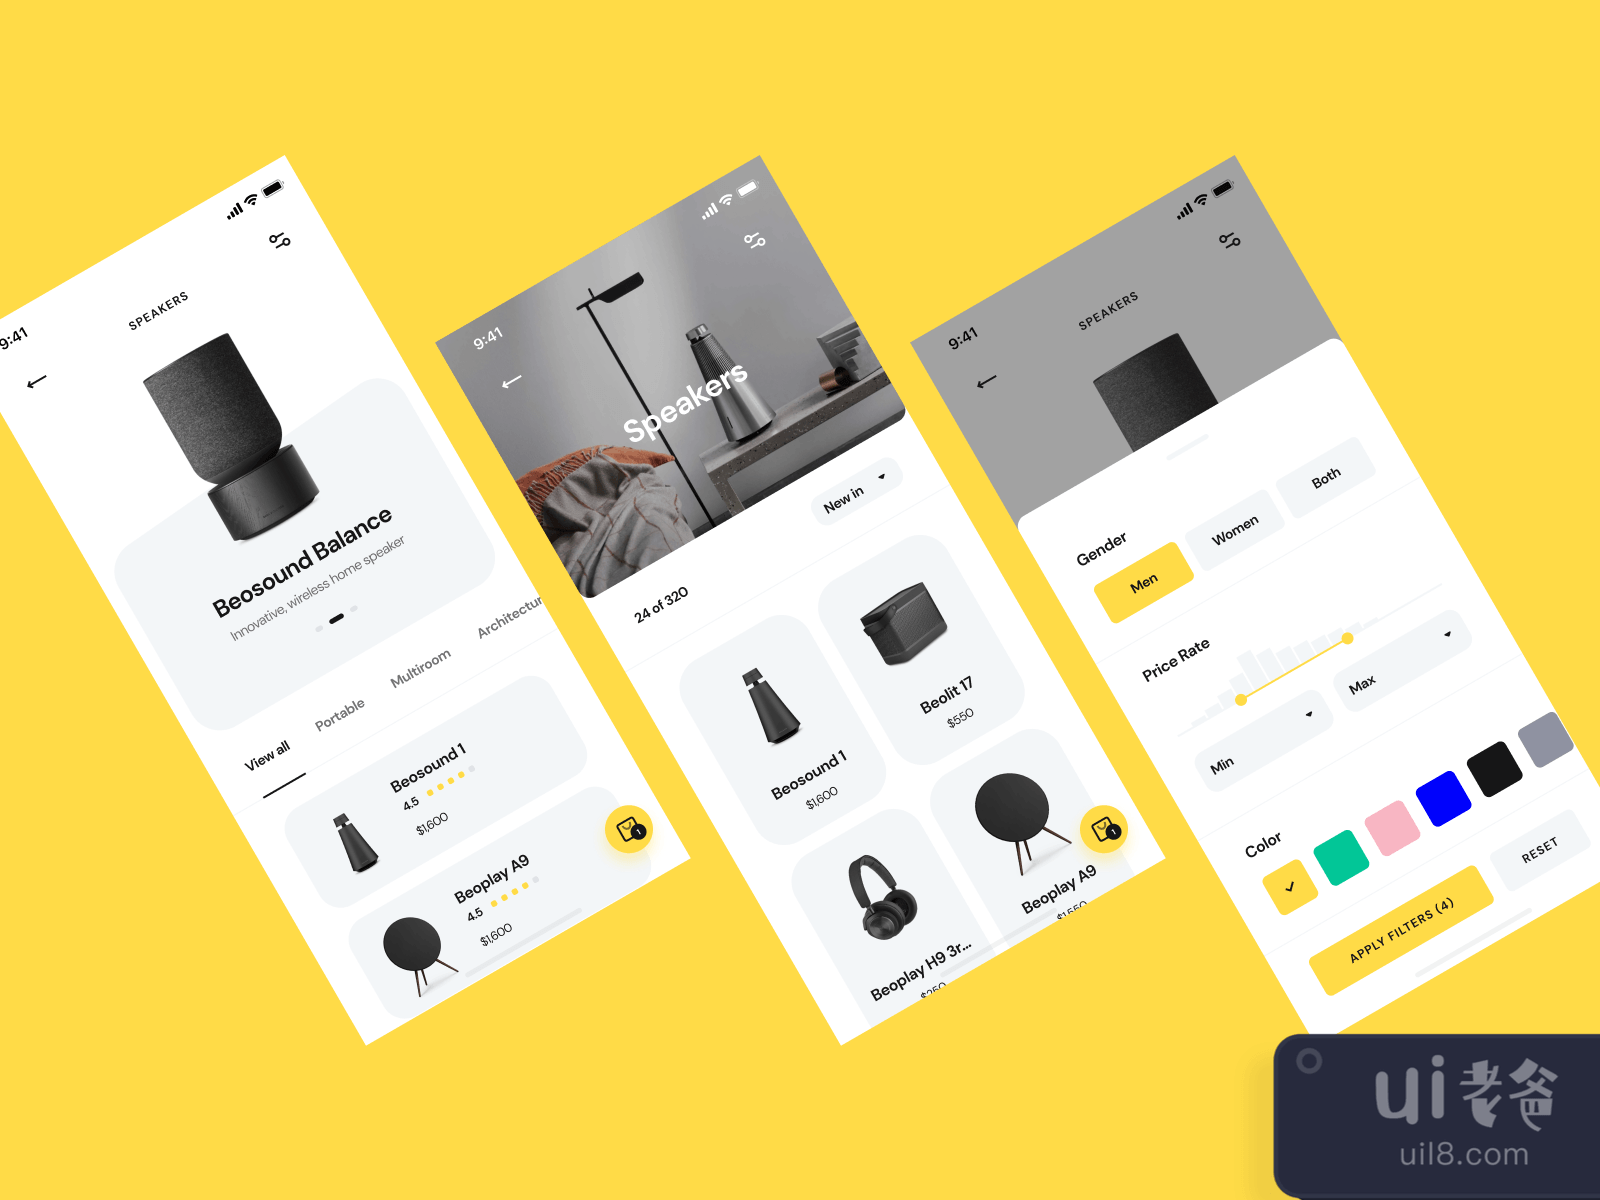 Premium Store App for Figma and Adobe XD No 3